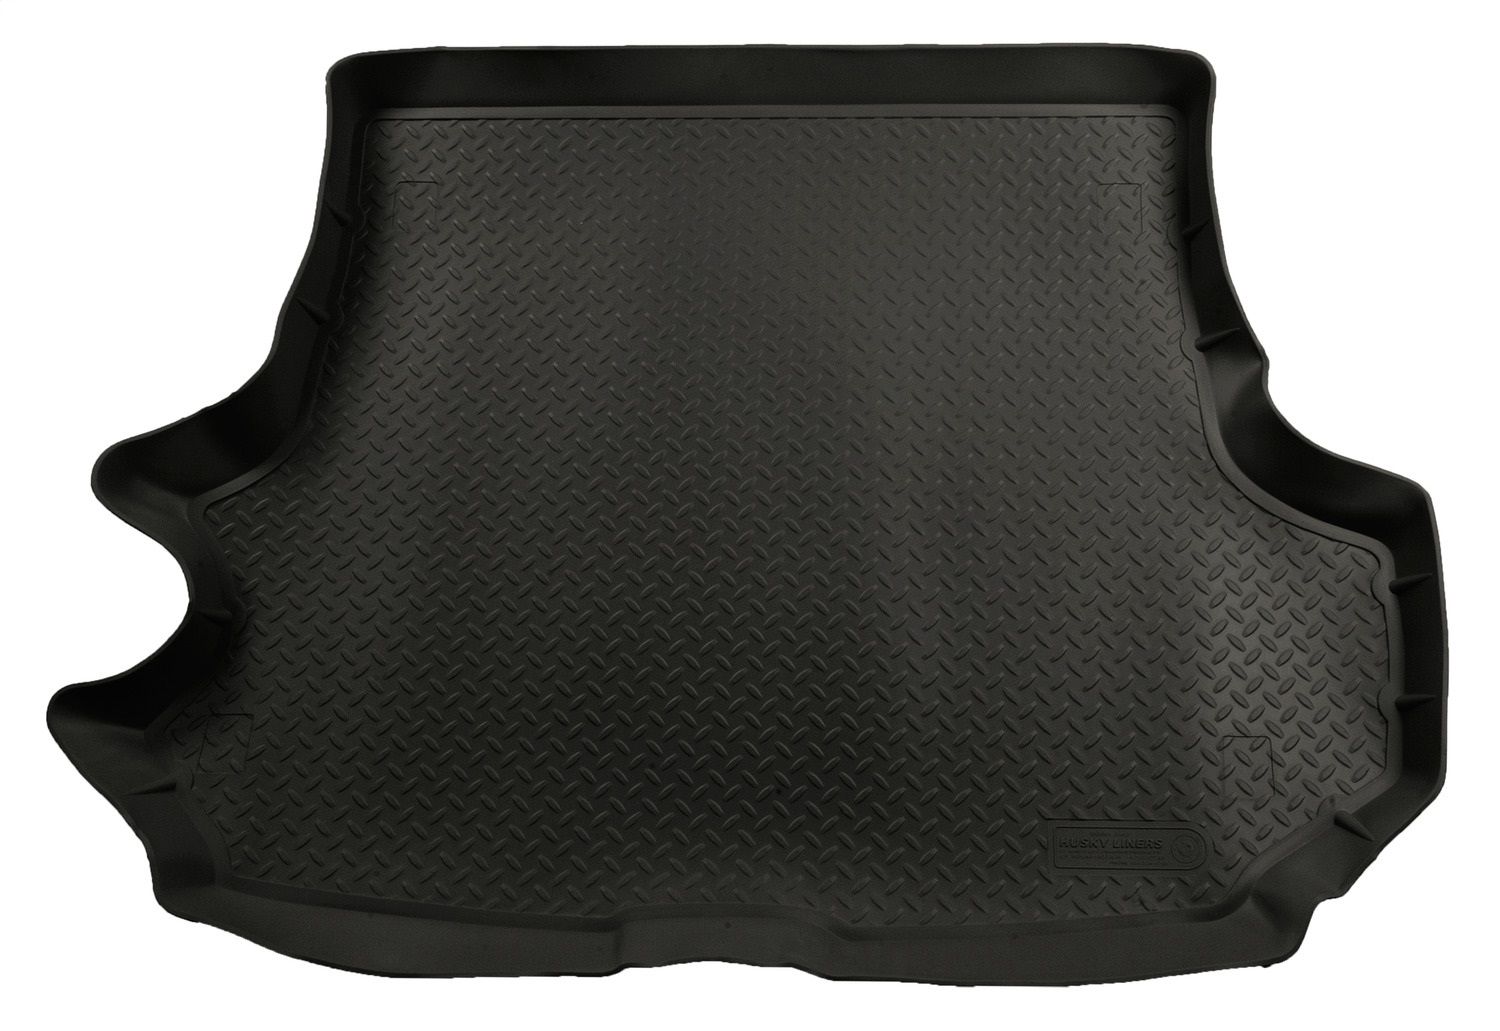 Husky Liners Husky Liners 20601 Classic Style; Cargo Liner Fits 99-04 Grand Cherokee (WJ)